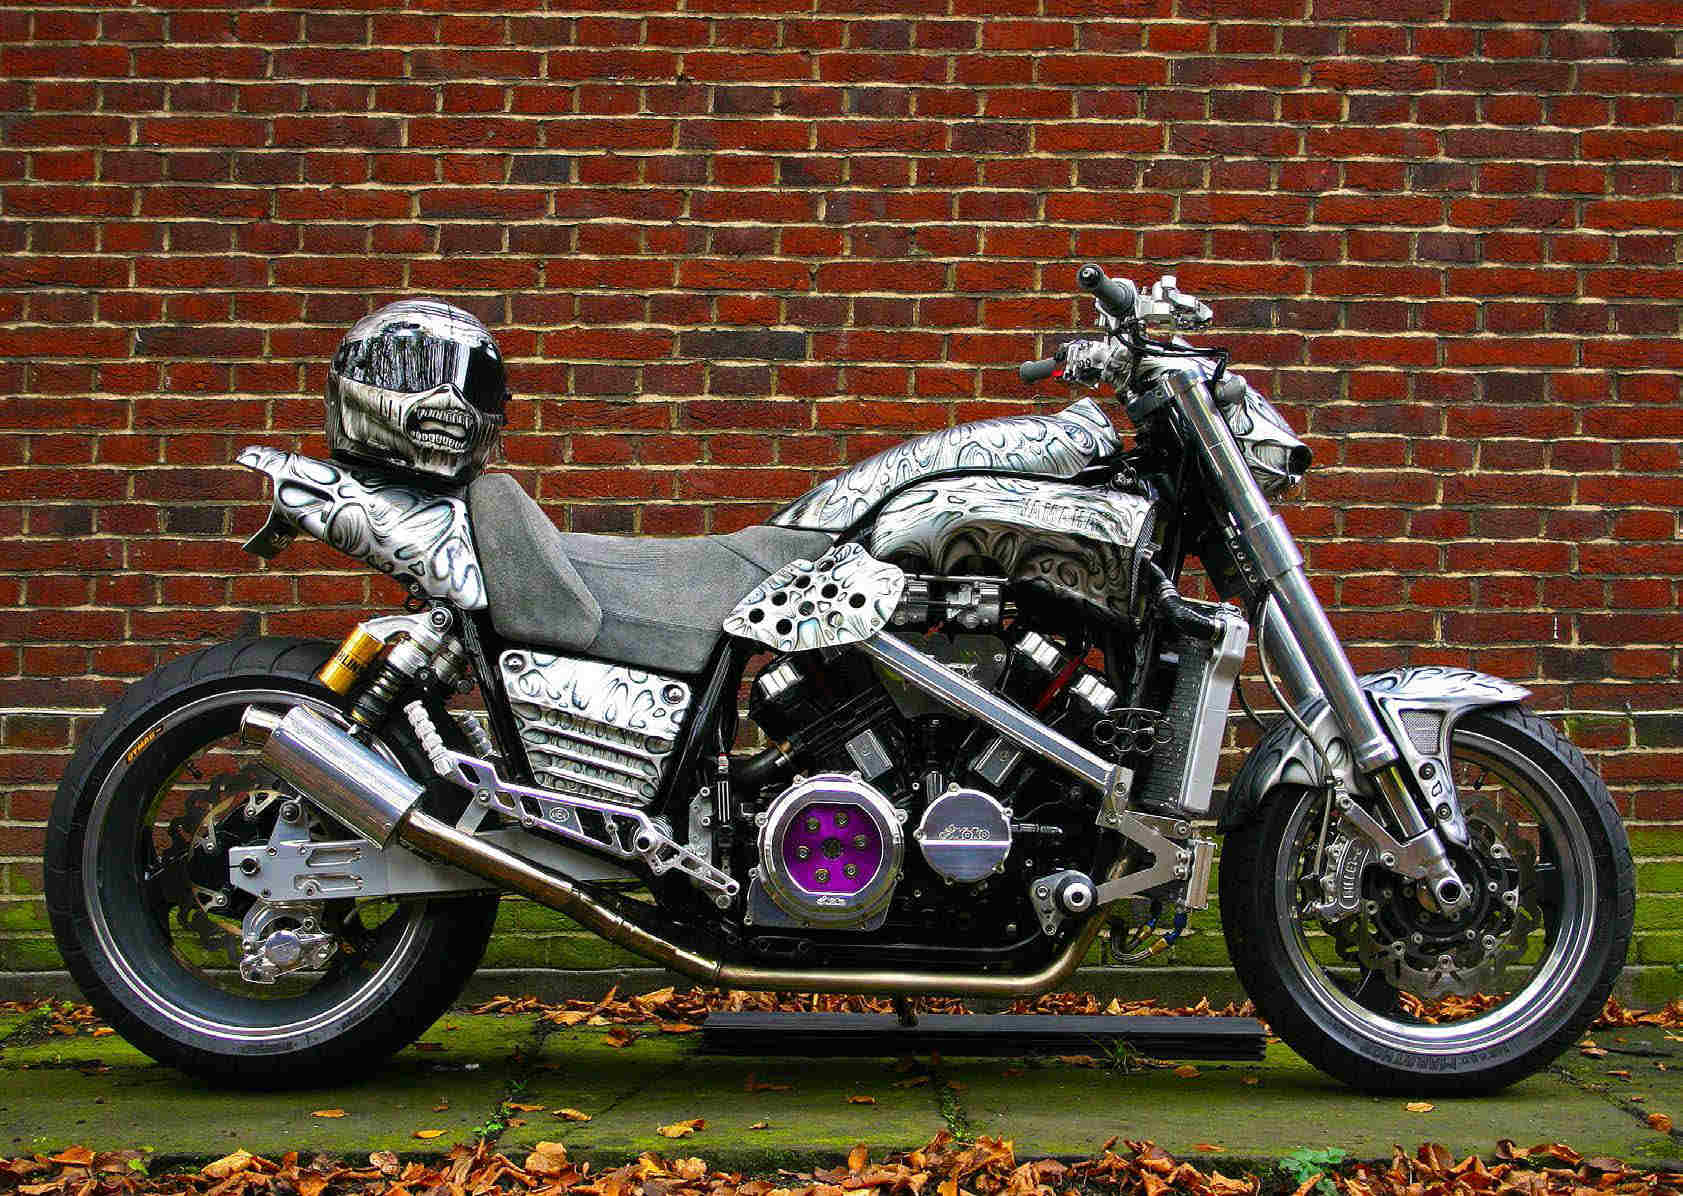 Iron Maiden's low rider motorcycle, with helmet on saddle, customised to suit their mascot Eddie the Head.